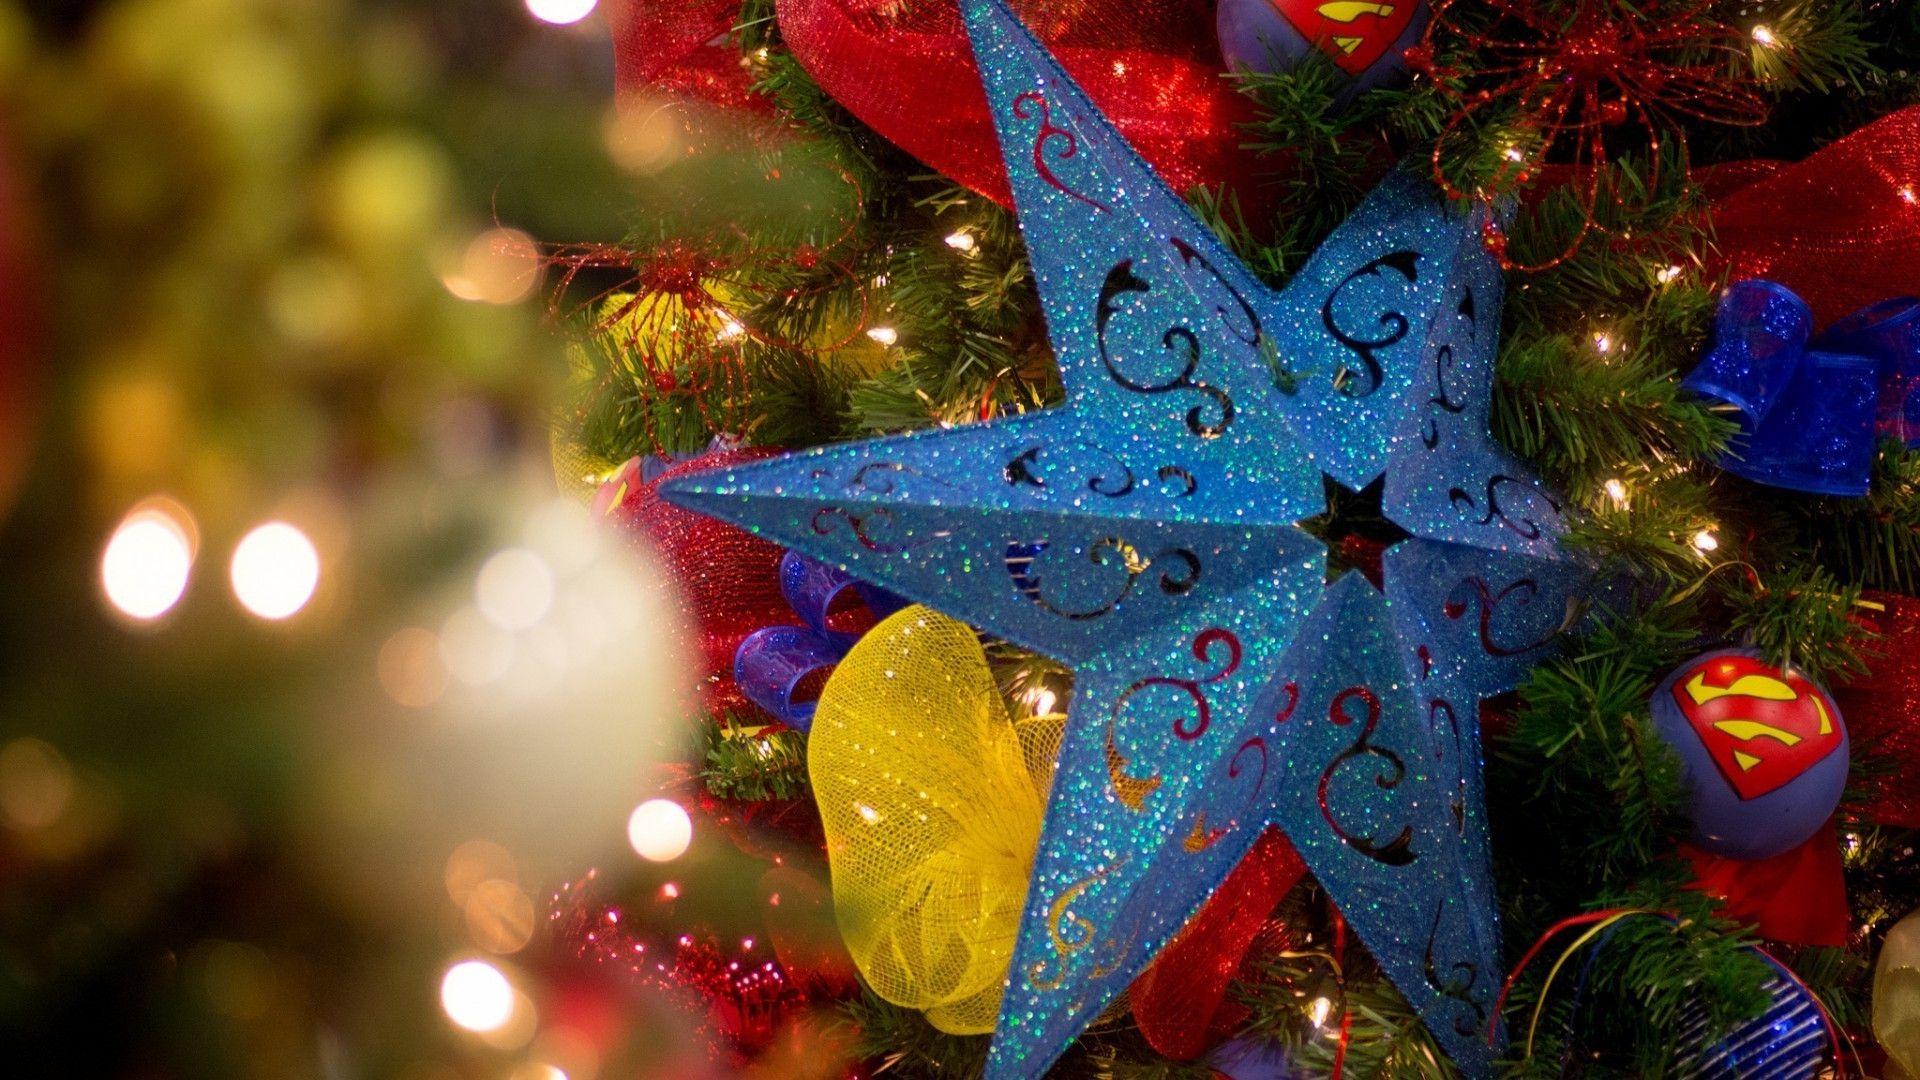 The star on the Christmas tree. Android wallpaper for free